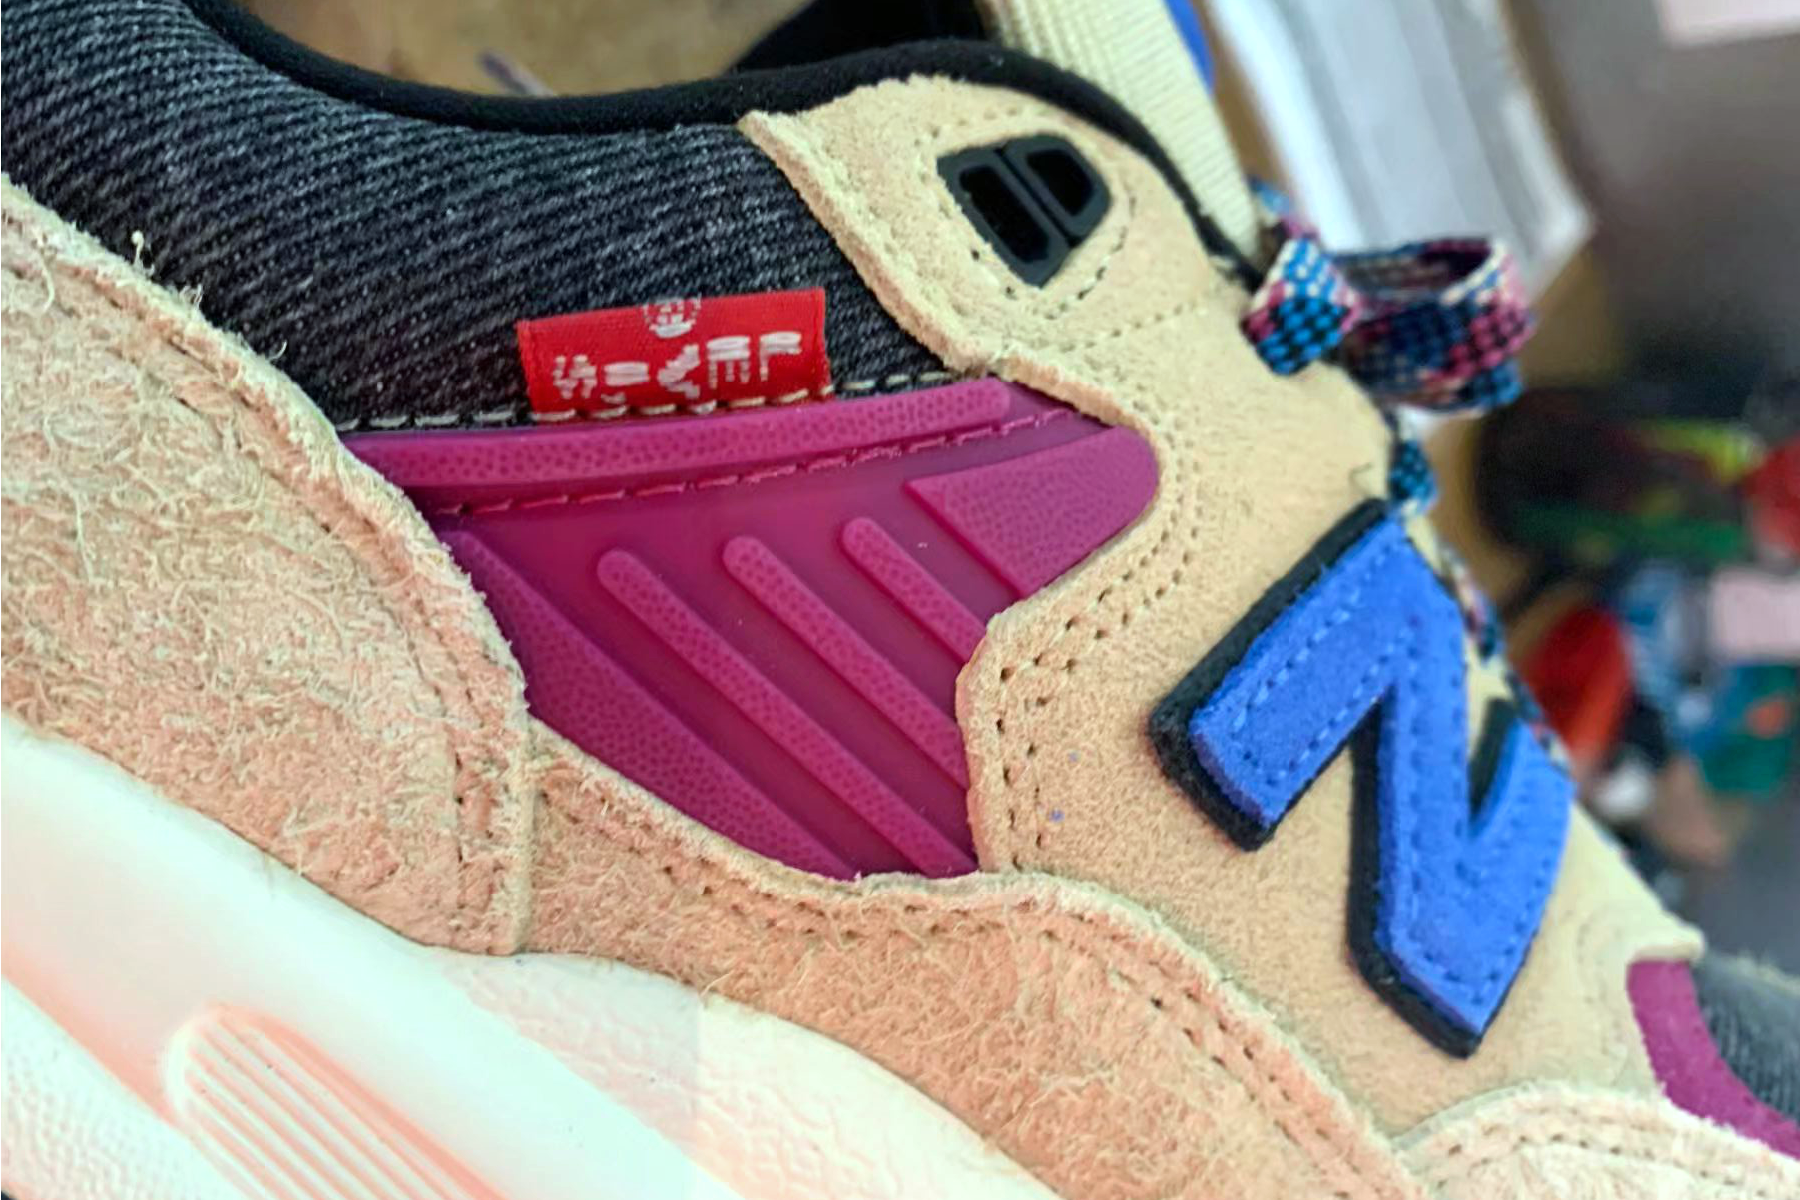 Levi's New Balance 580 Sneaker Collab Is a Colorful Sight